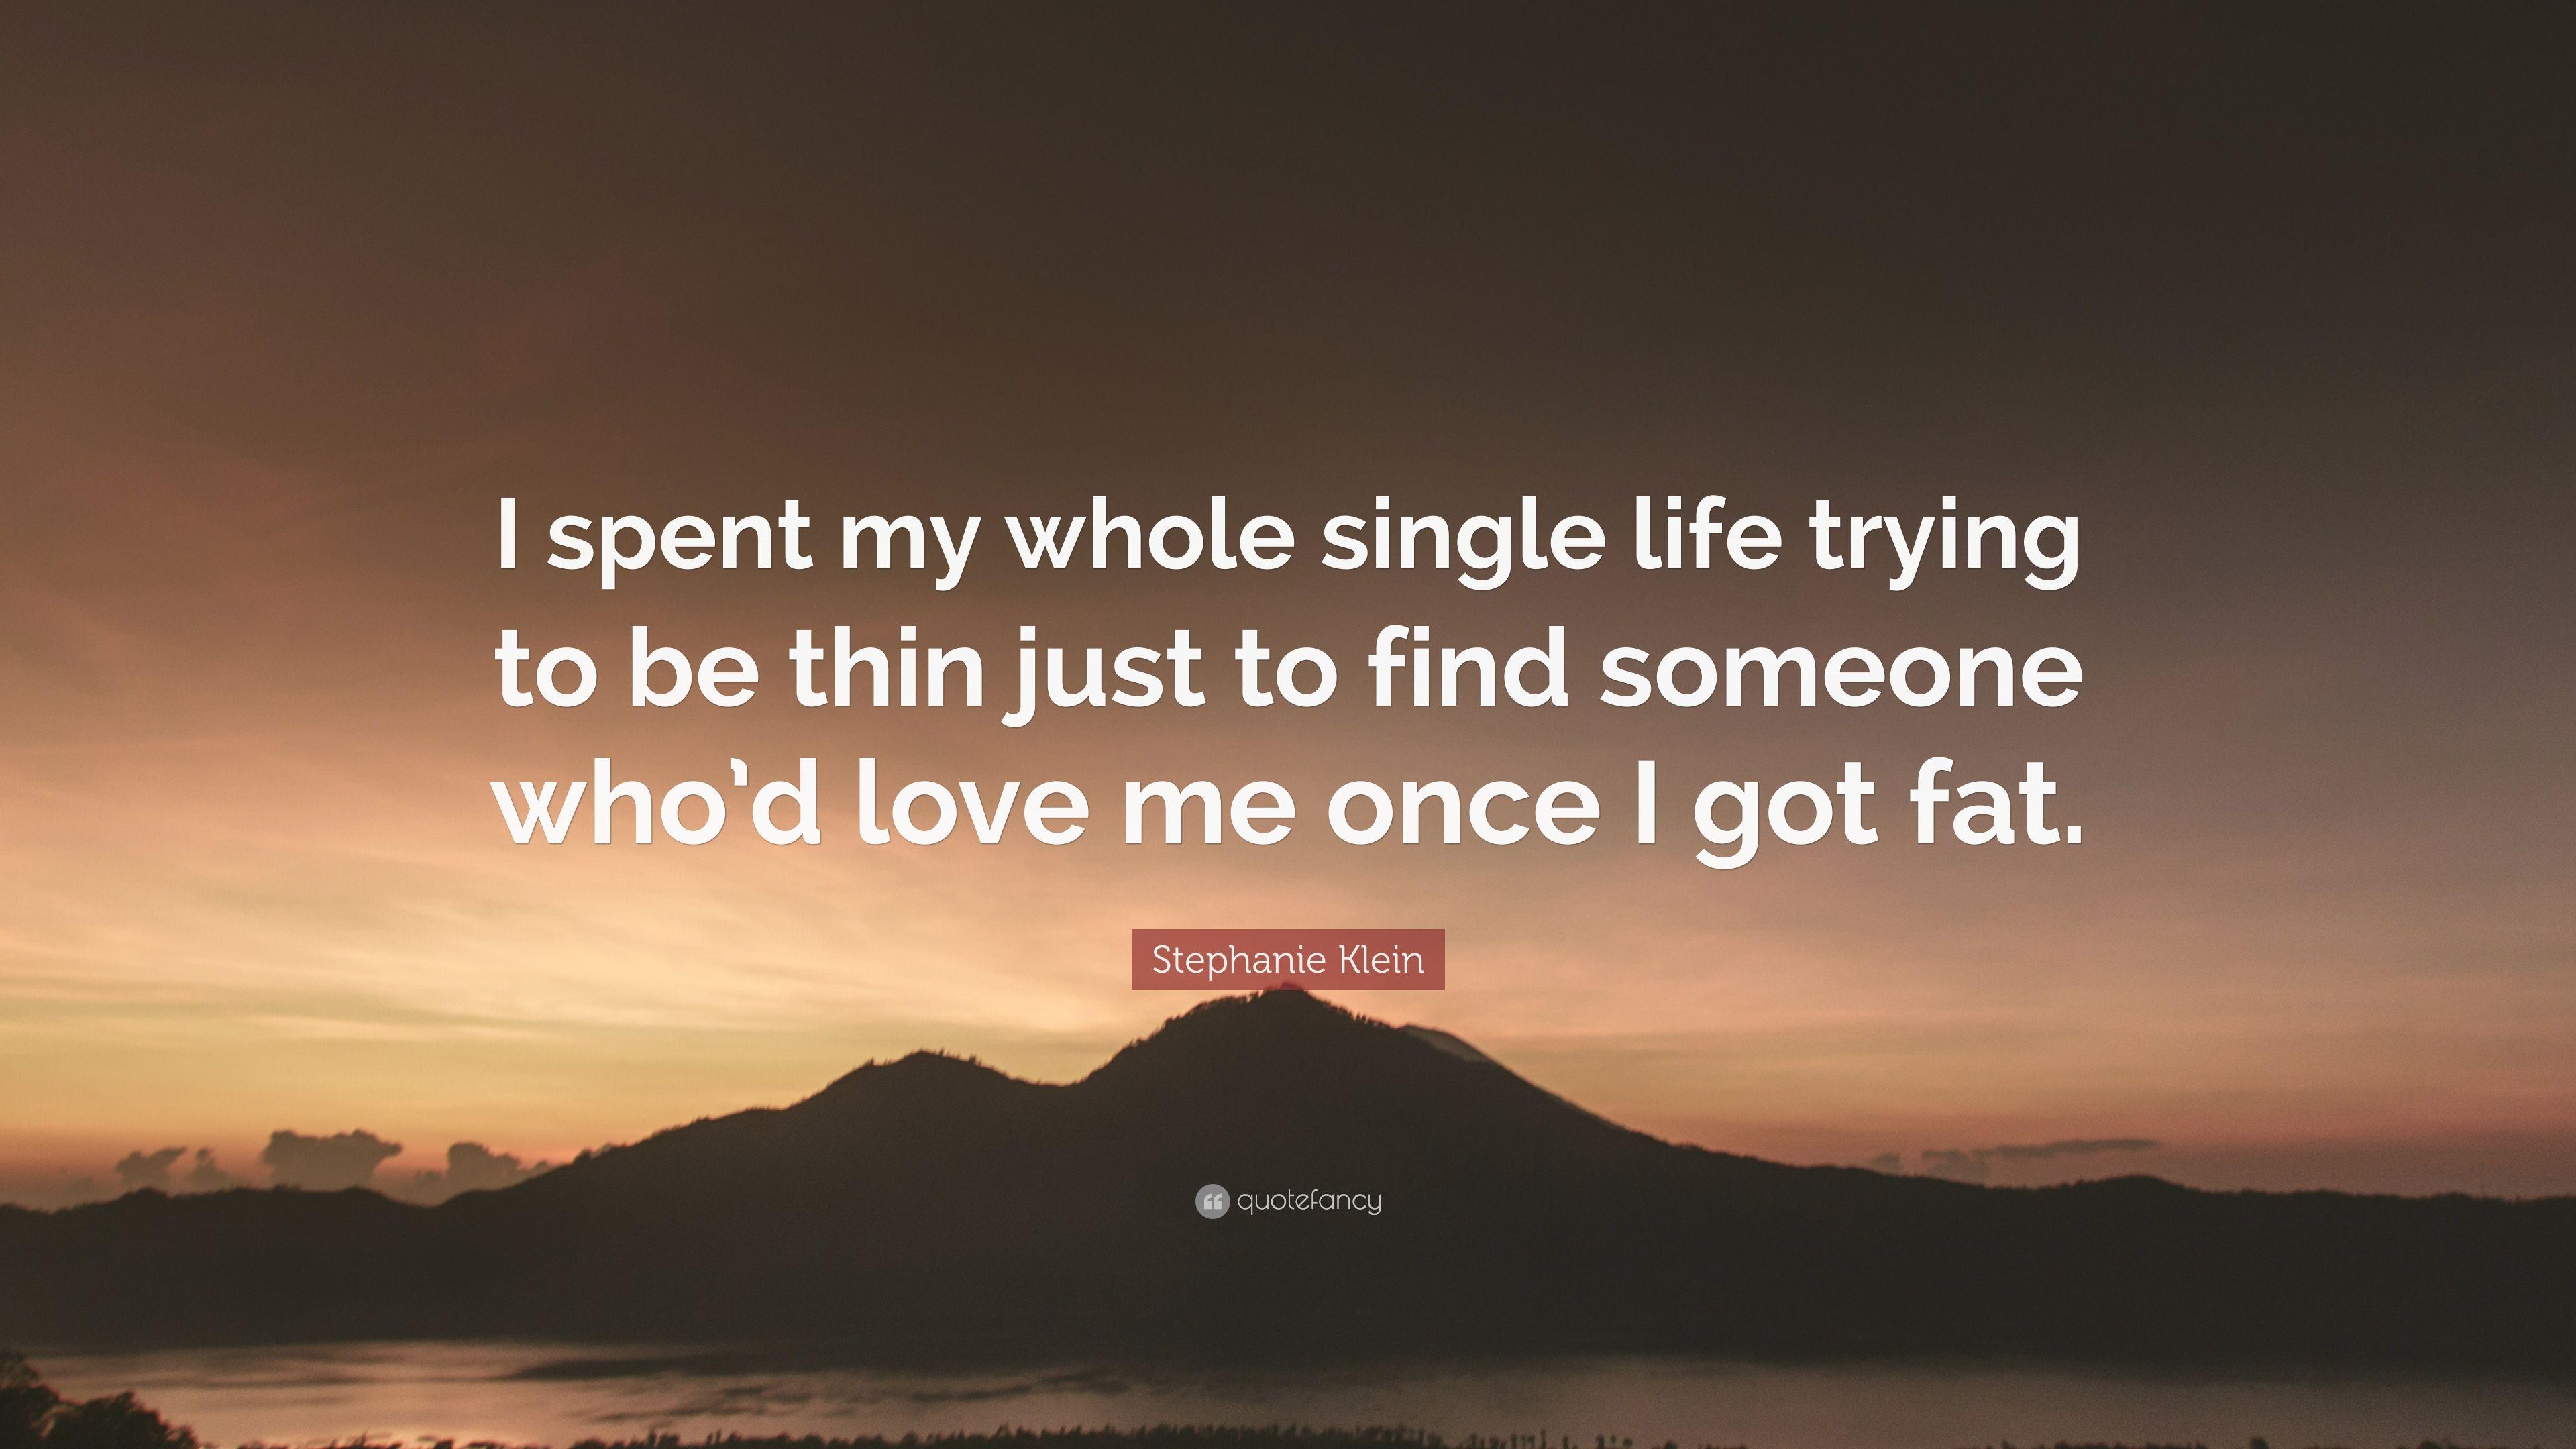 Stephanie Klein Quote: “I spent my whole single life trying